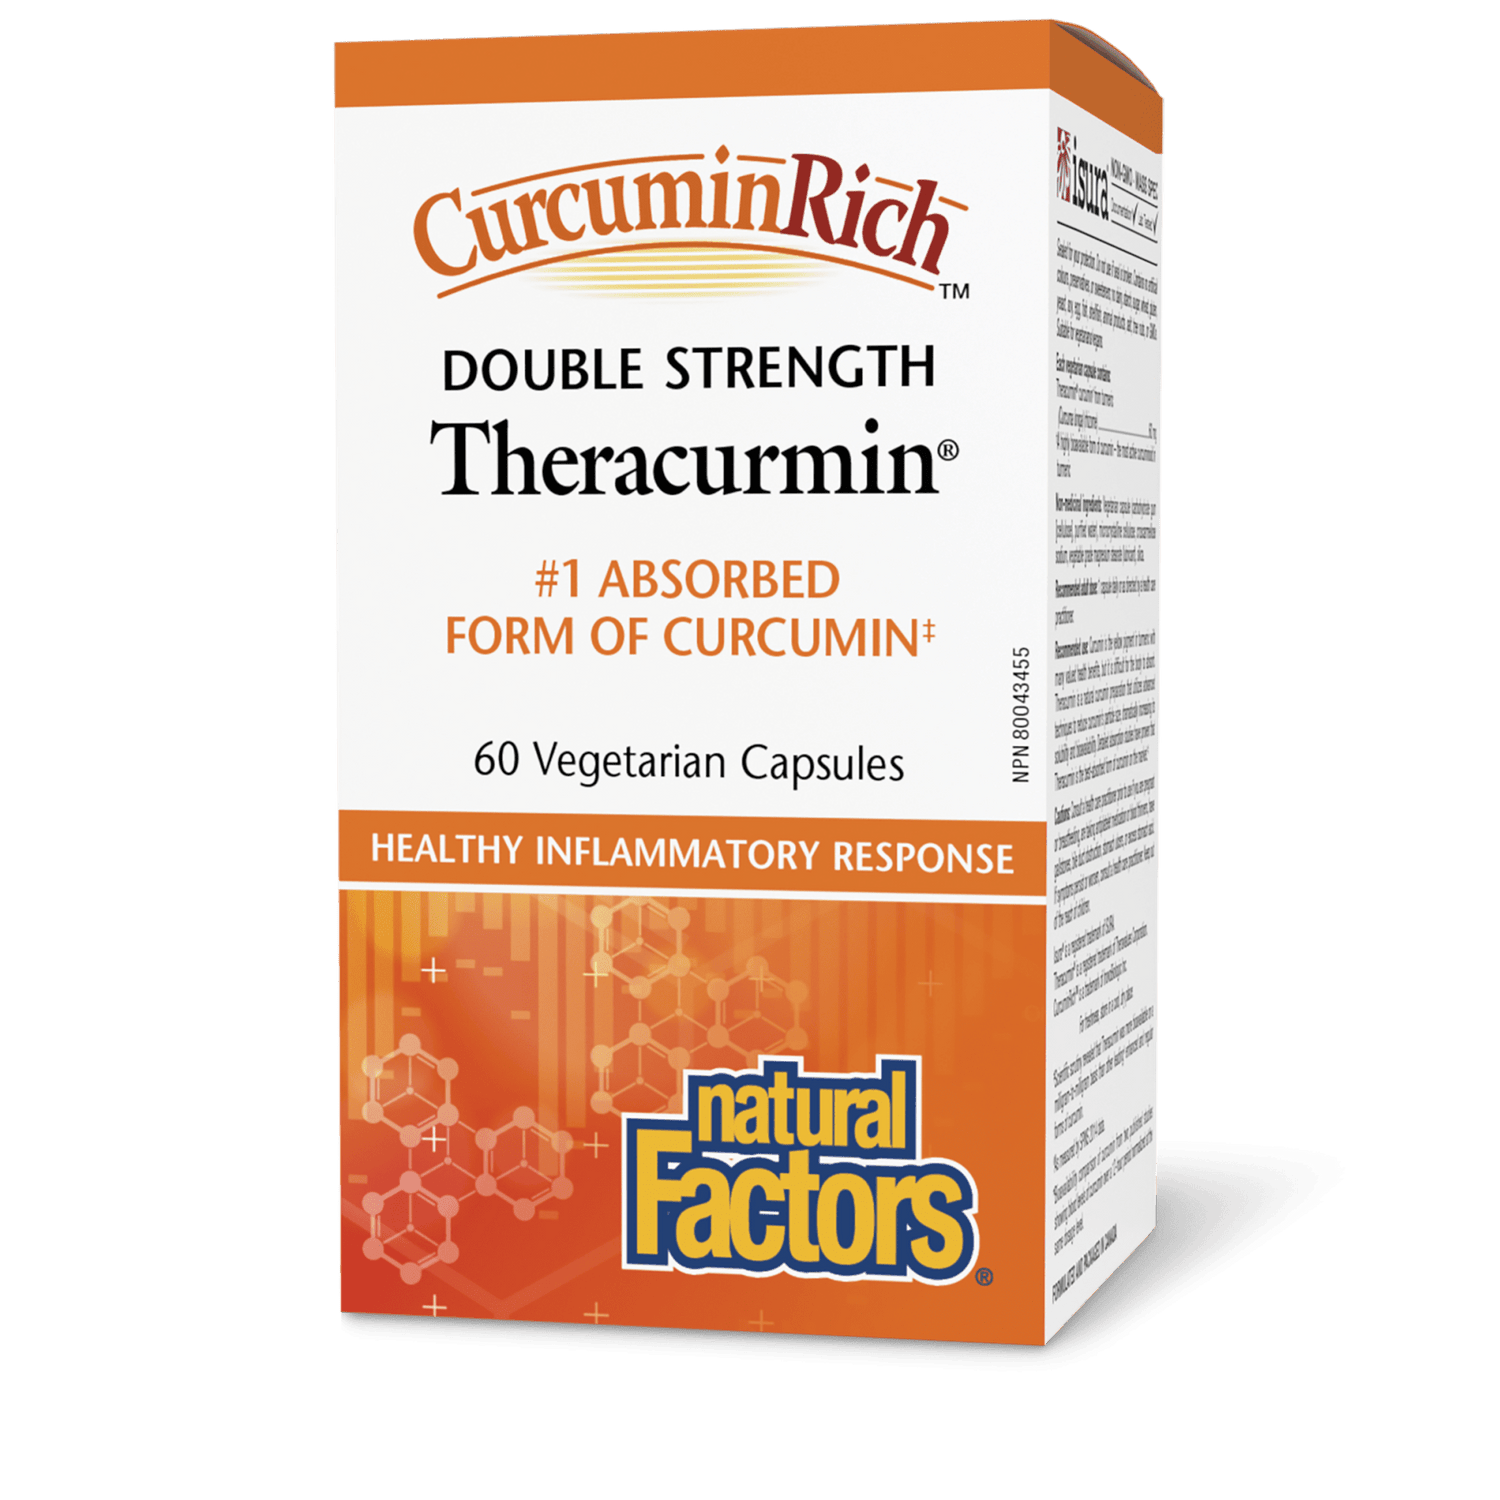 Theracurmin Double Strength, CurcuminRich, Natural Factors|v|image|4544